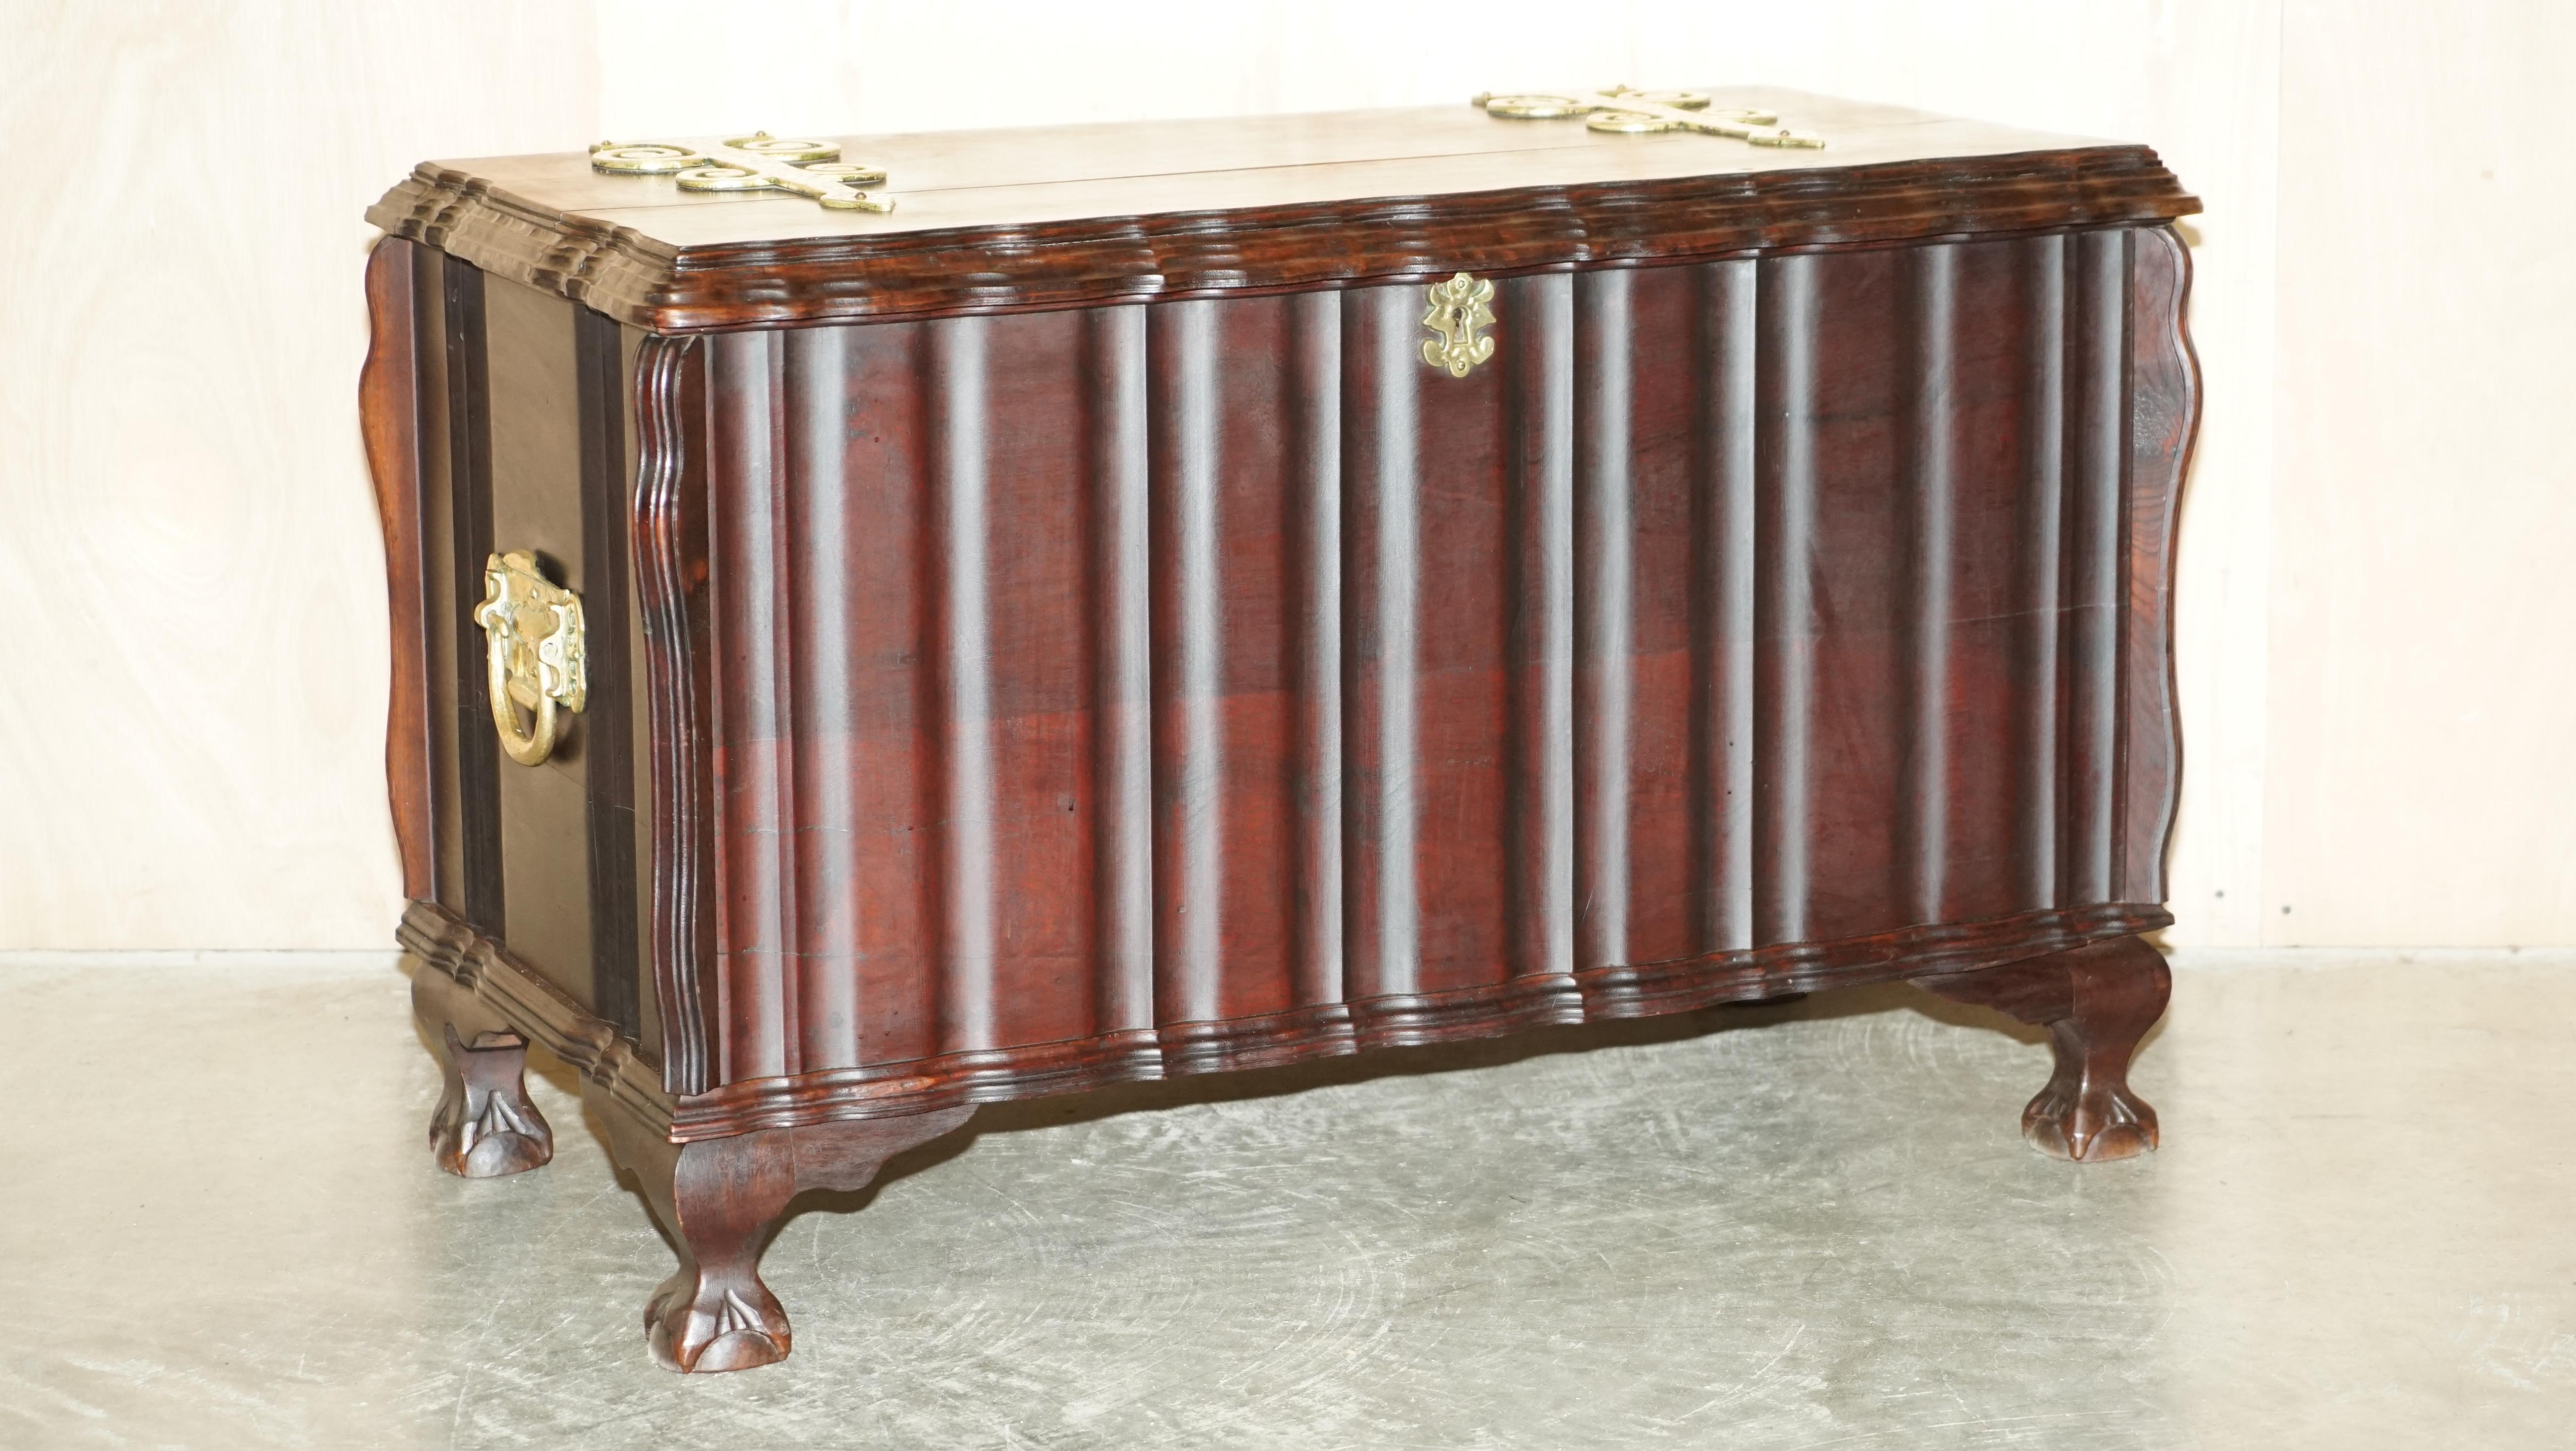 Royal House Antiques

Royal House Antiques is delighted to offer for sale this rather lovely, ornately hand carved trunk with oversized brass hinges and handles 

Please note the delivery fee listed is just a guide, it covers within the M25 only for